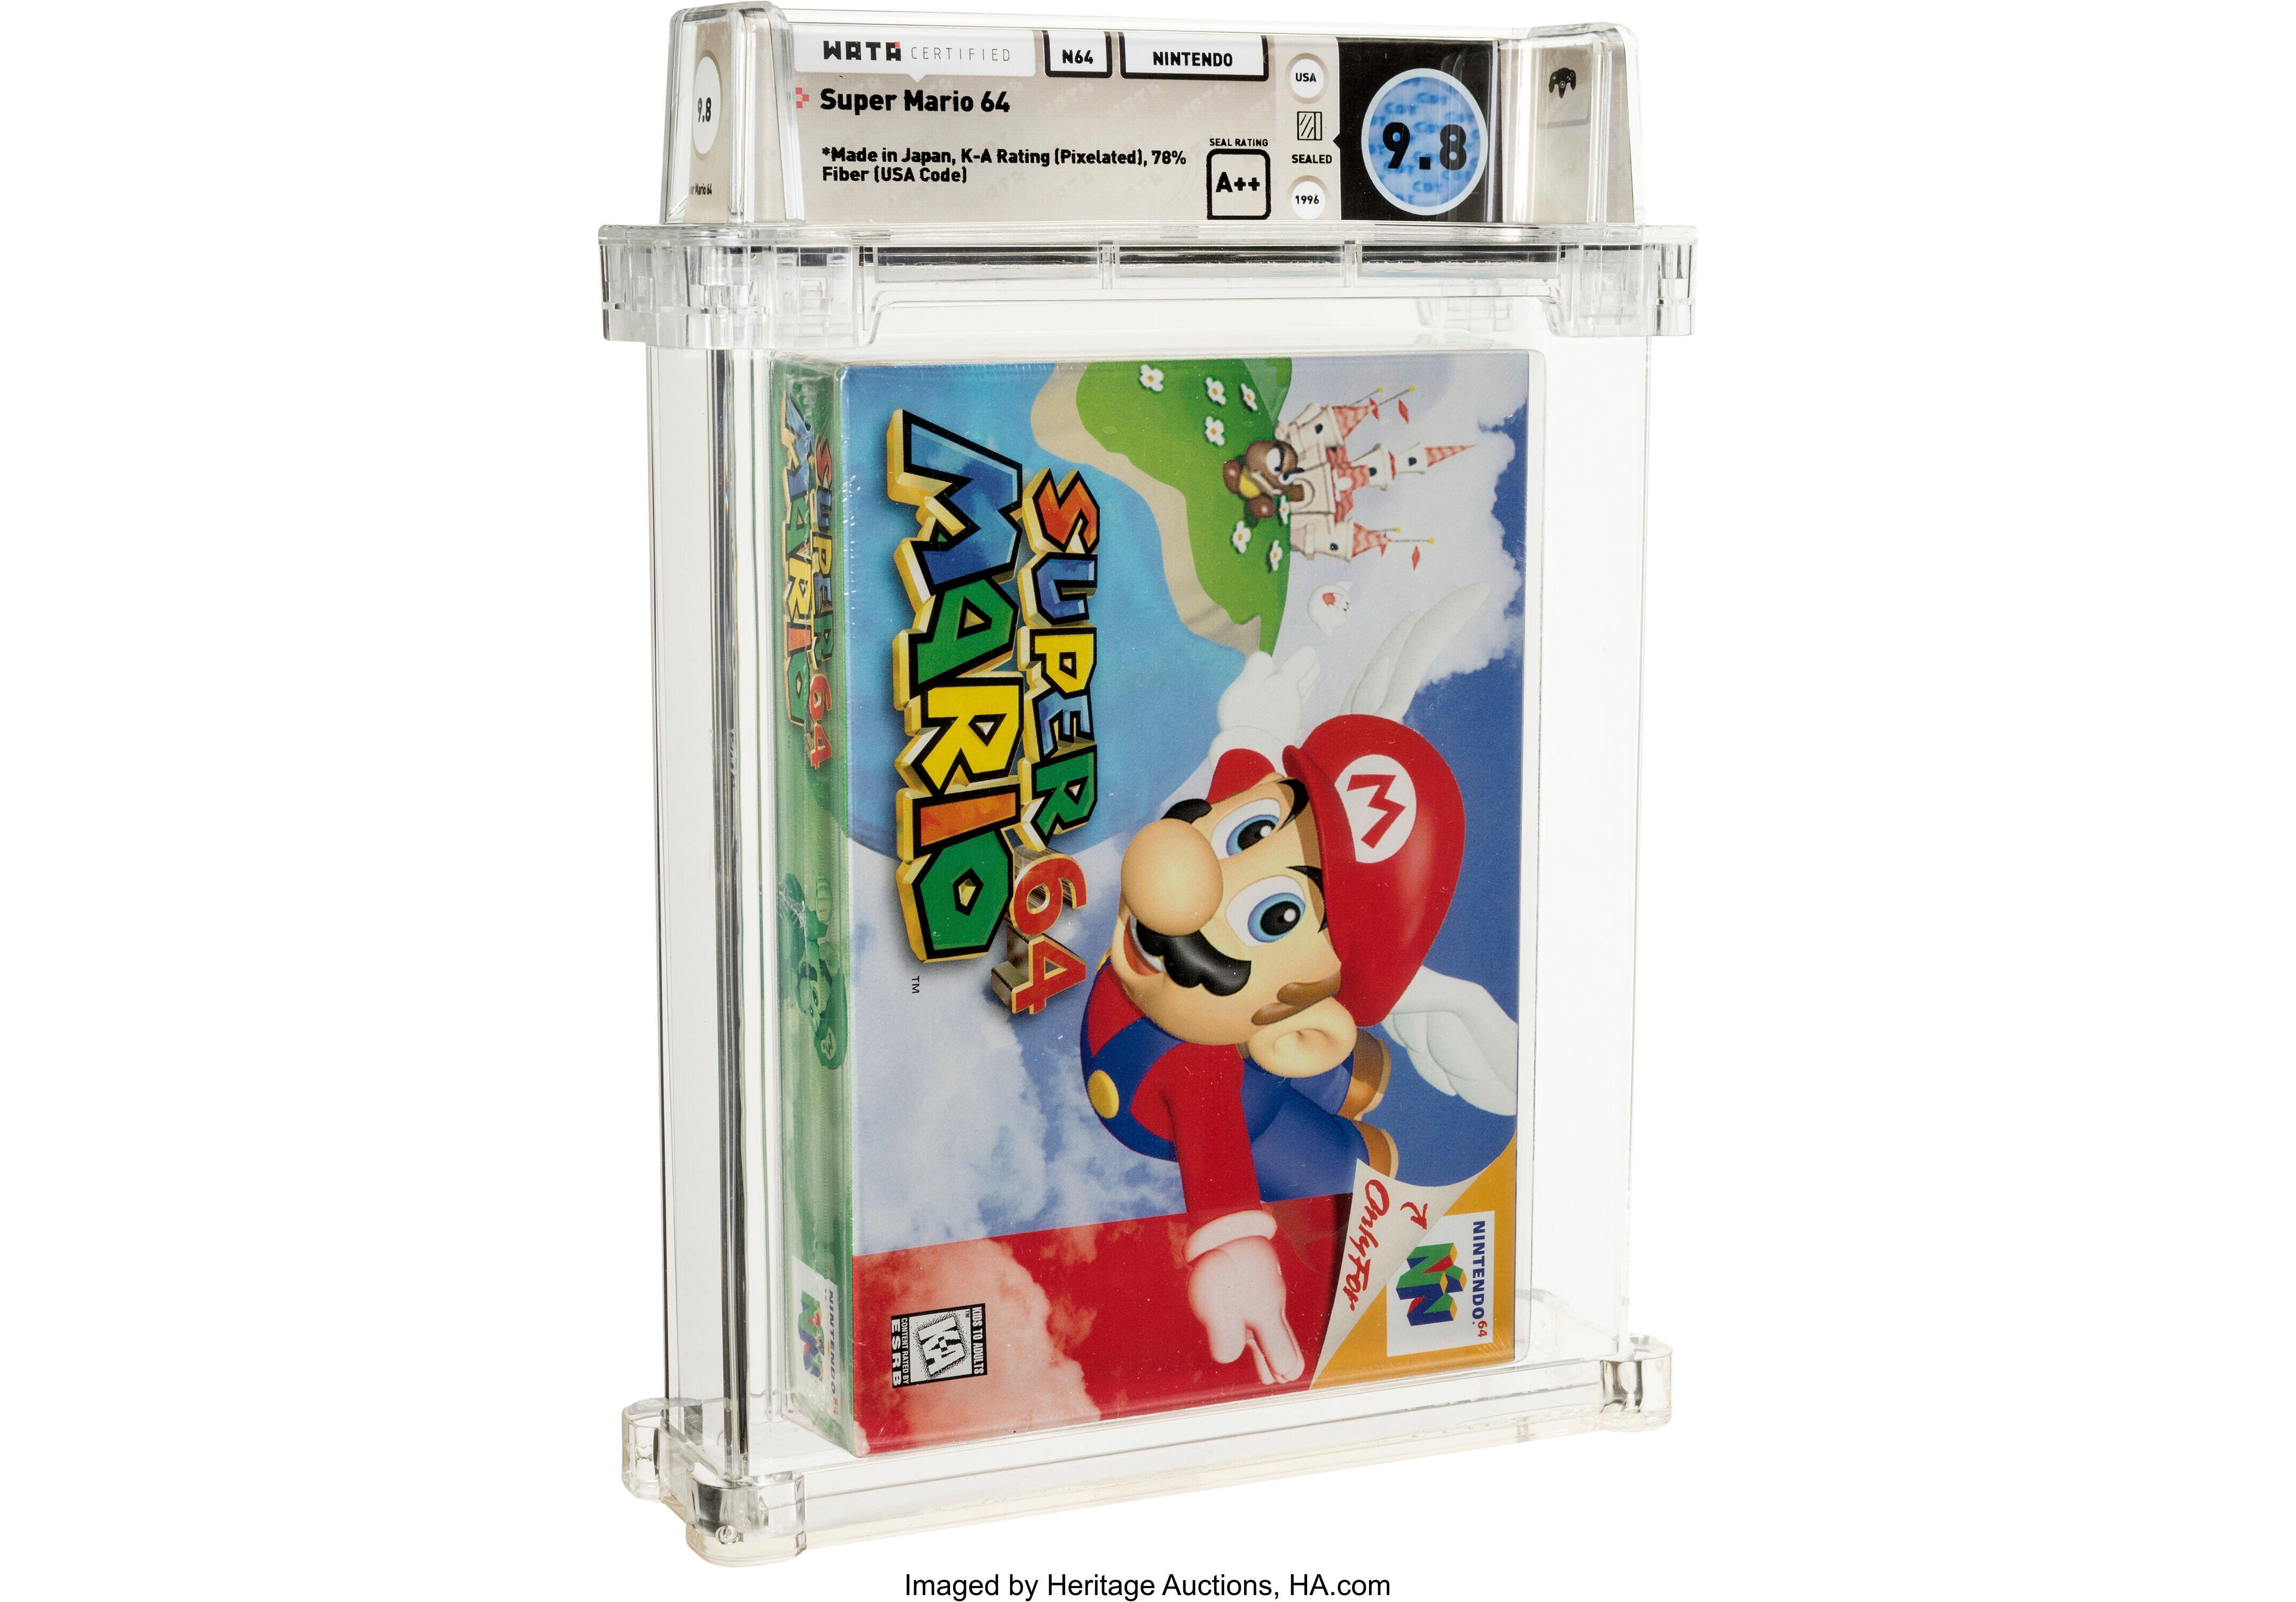 This photo provided by Heritage Auctions shows an unopened copy of Nintendo’s Super Mario 64 that has sold at auction for $1.56 million. Heritage Auctions in Dallas said that the 1996 video game sold Sunday, July 11, 2021, breaking its previous record price for the sale of a single video game.